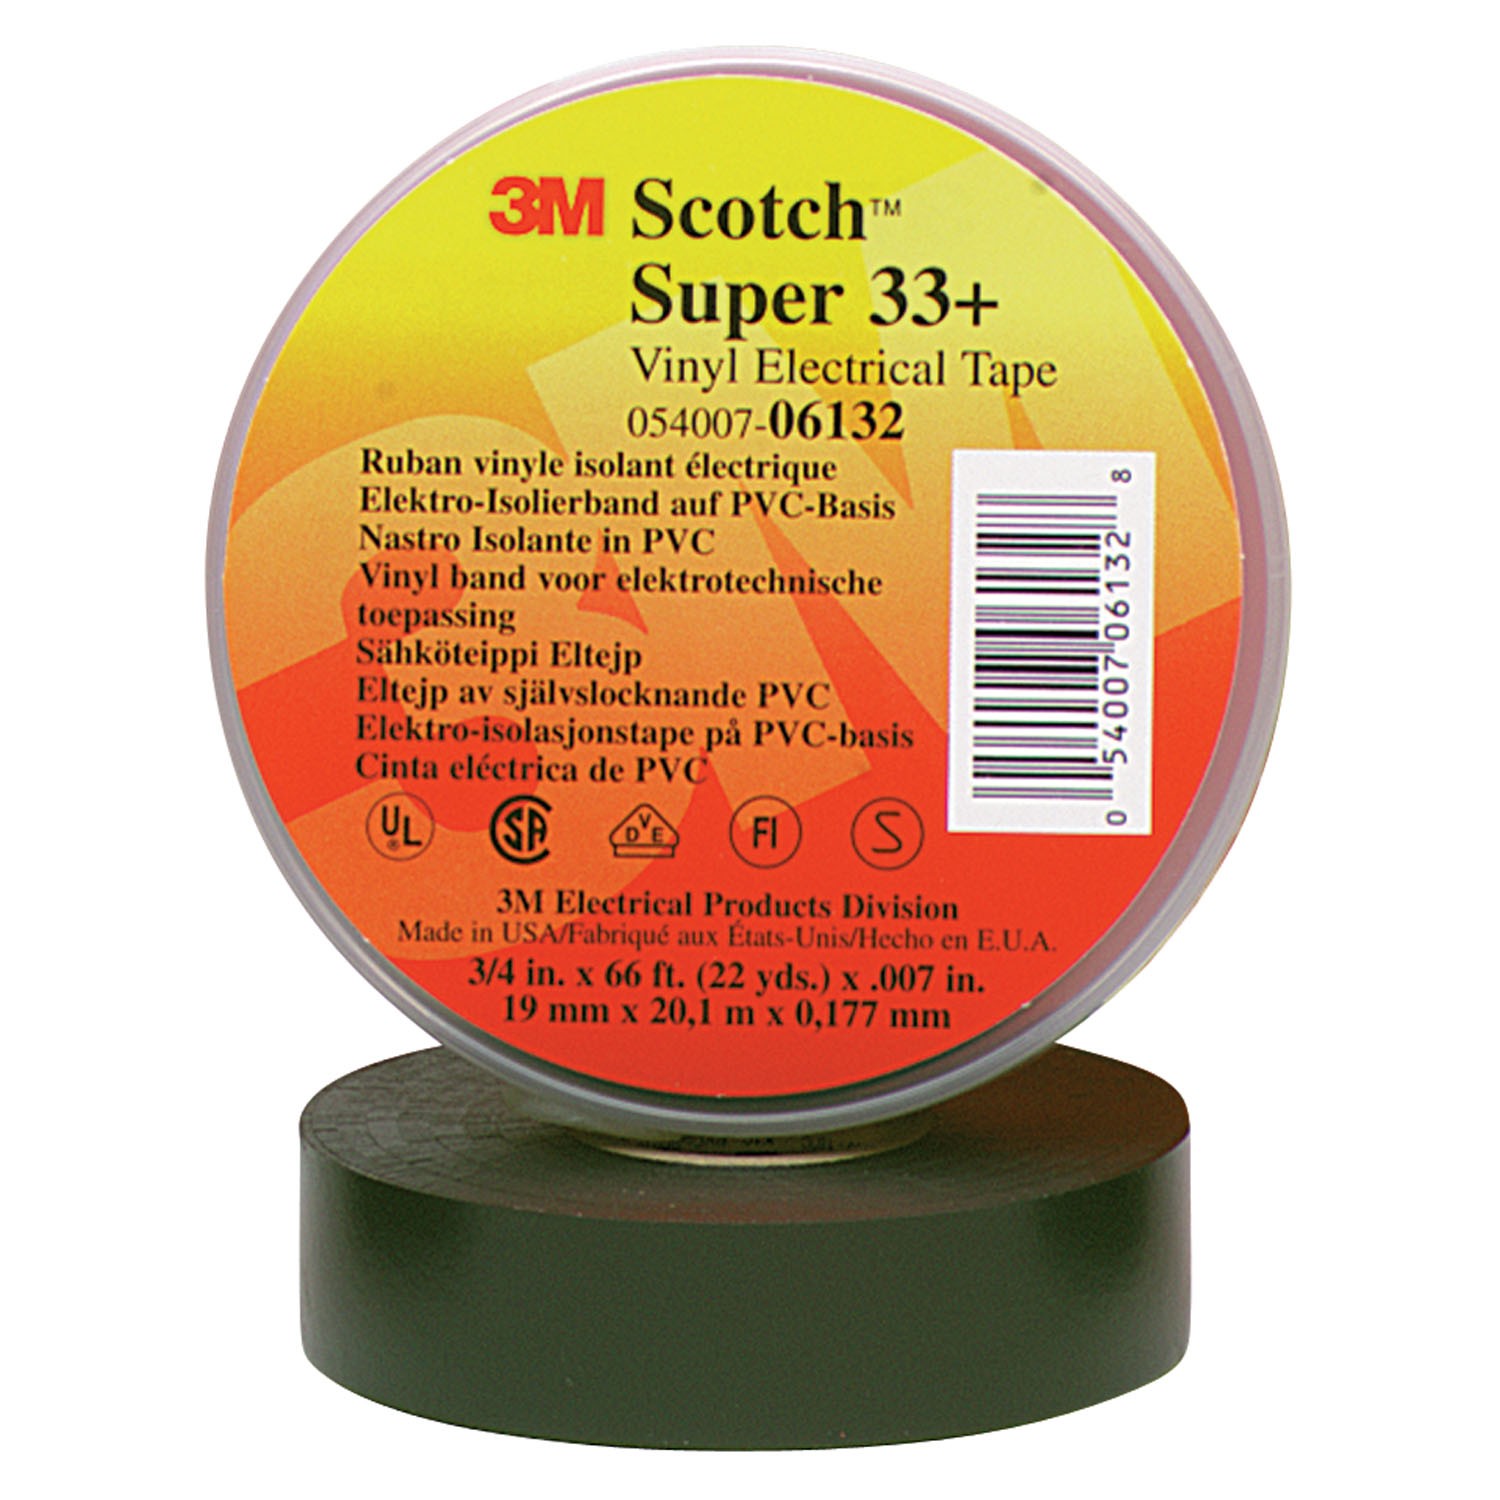 3M Scotch Super 33+ Electrical Tape - 1 in x 36 yd (108 ft), Premium Grade  All-Weather Vinyl, Resistant to Abrasion, Moisture, Corrosion, Alkalies - 1